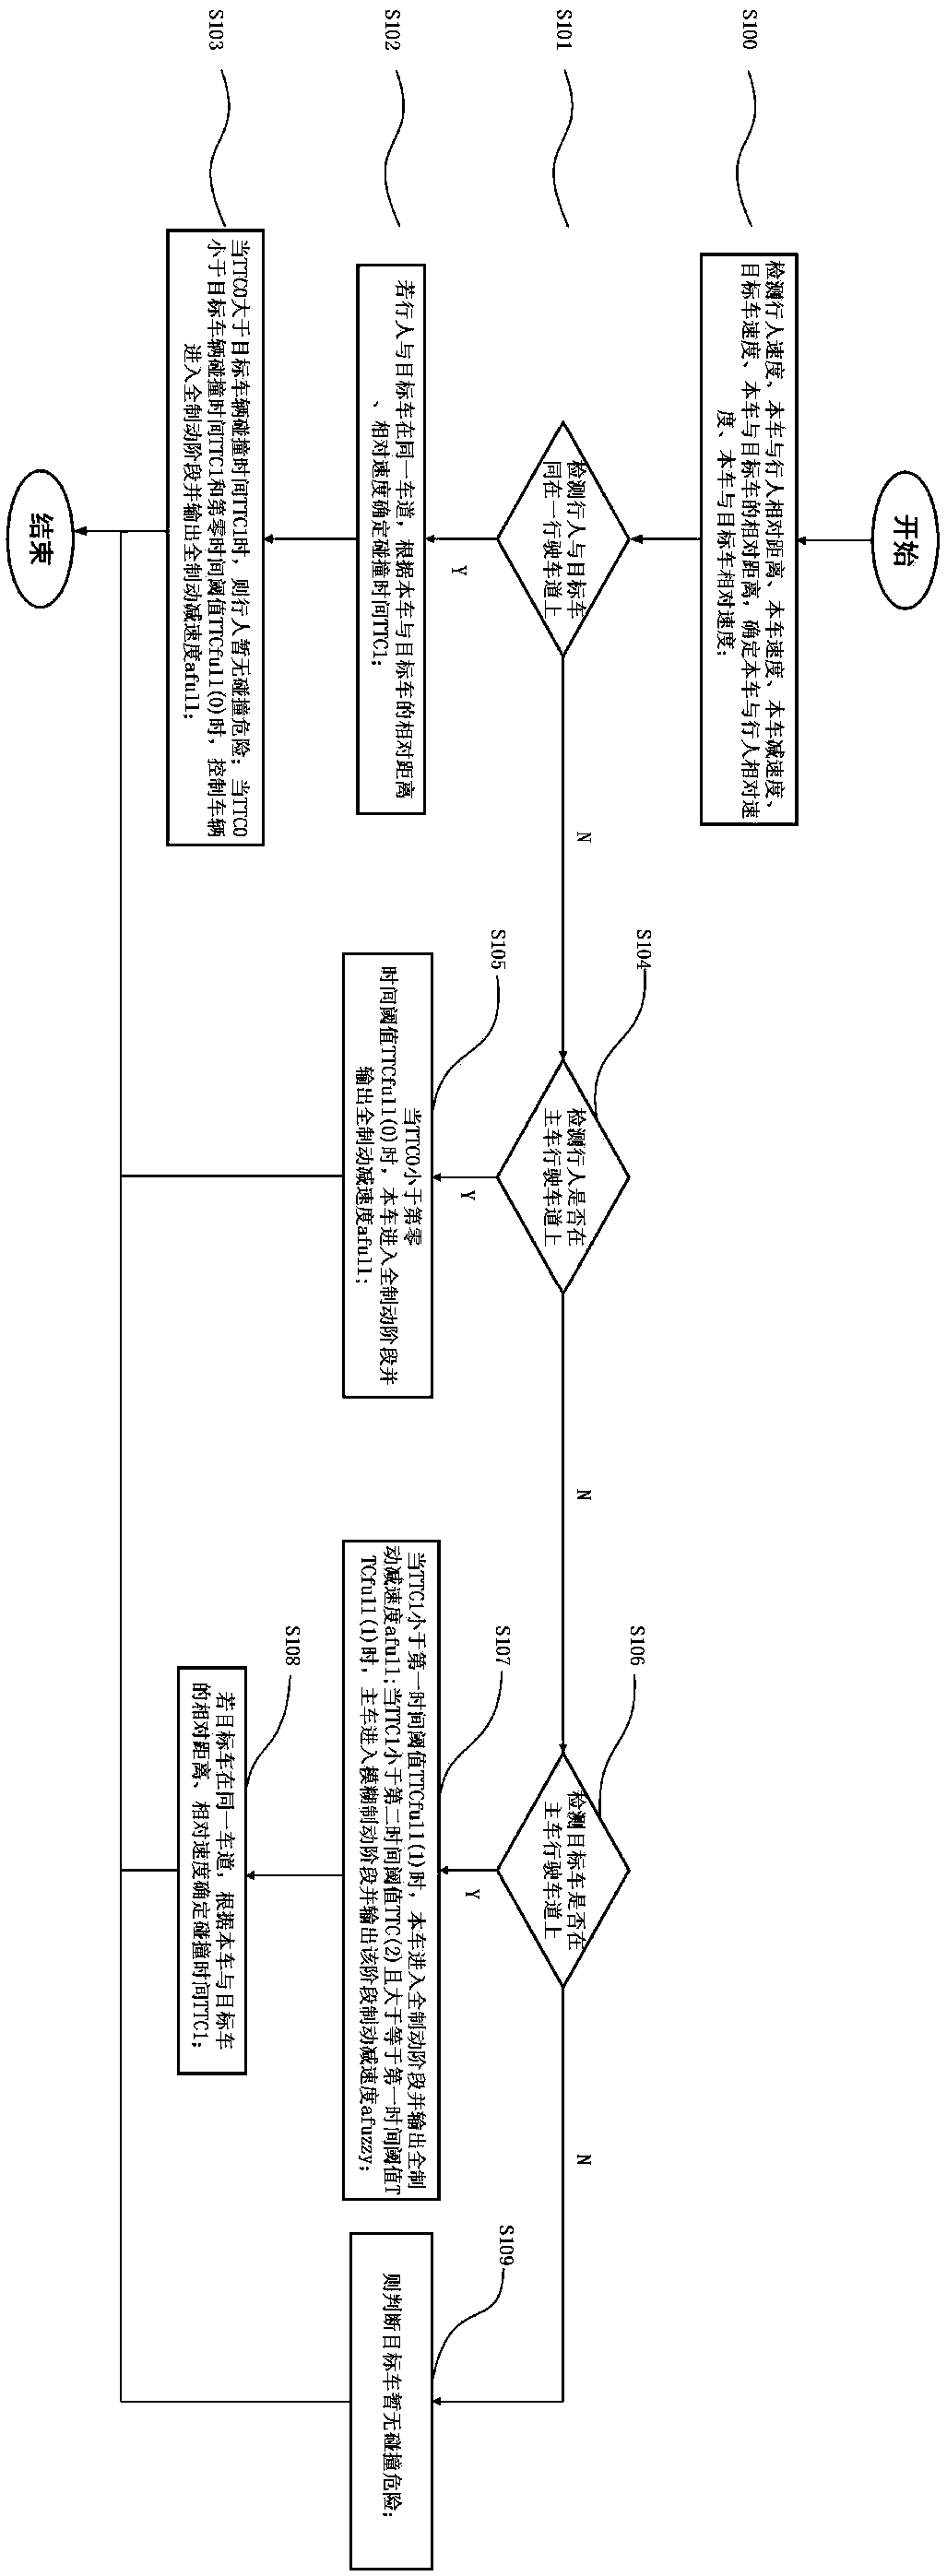 Control method and device for automatic emergency braking system